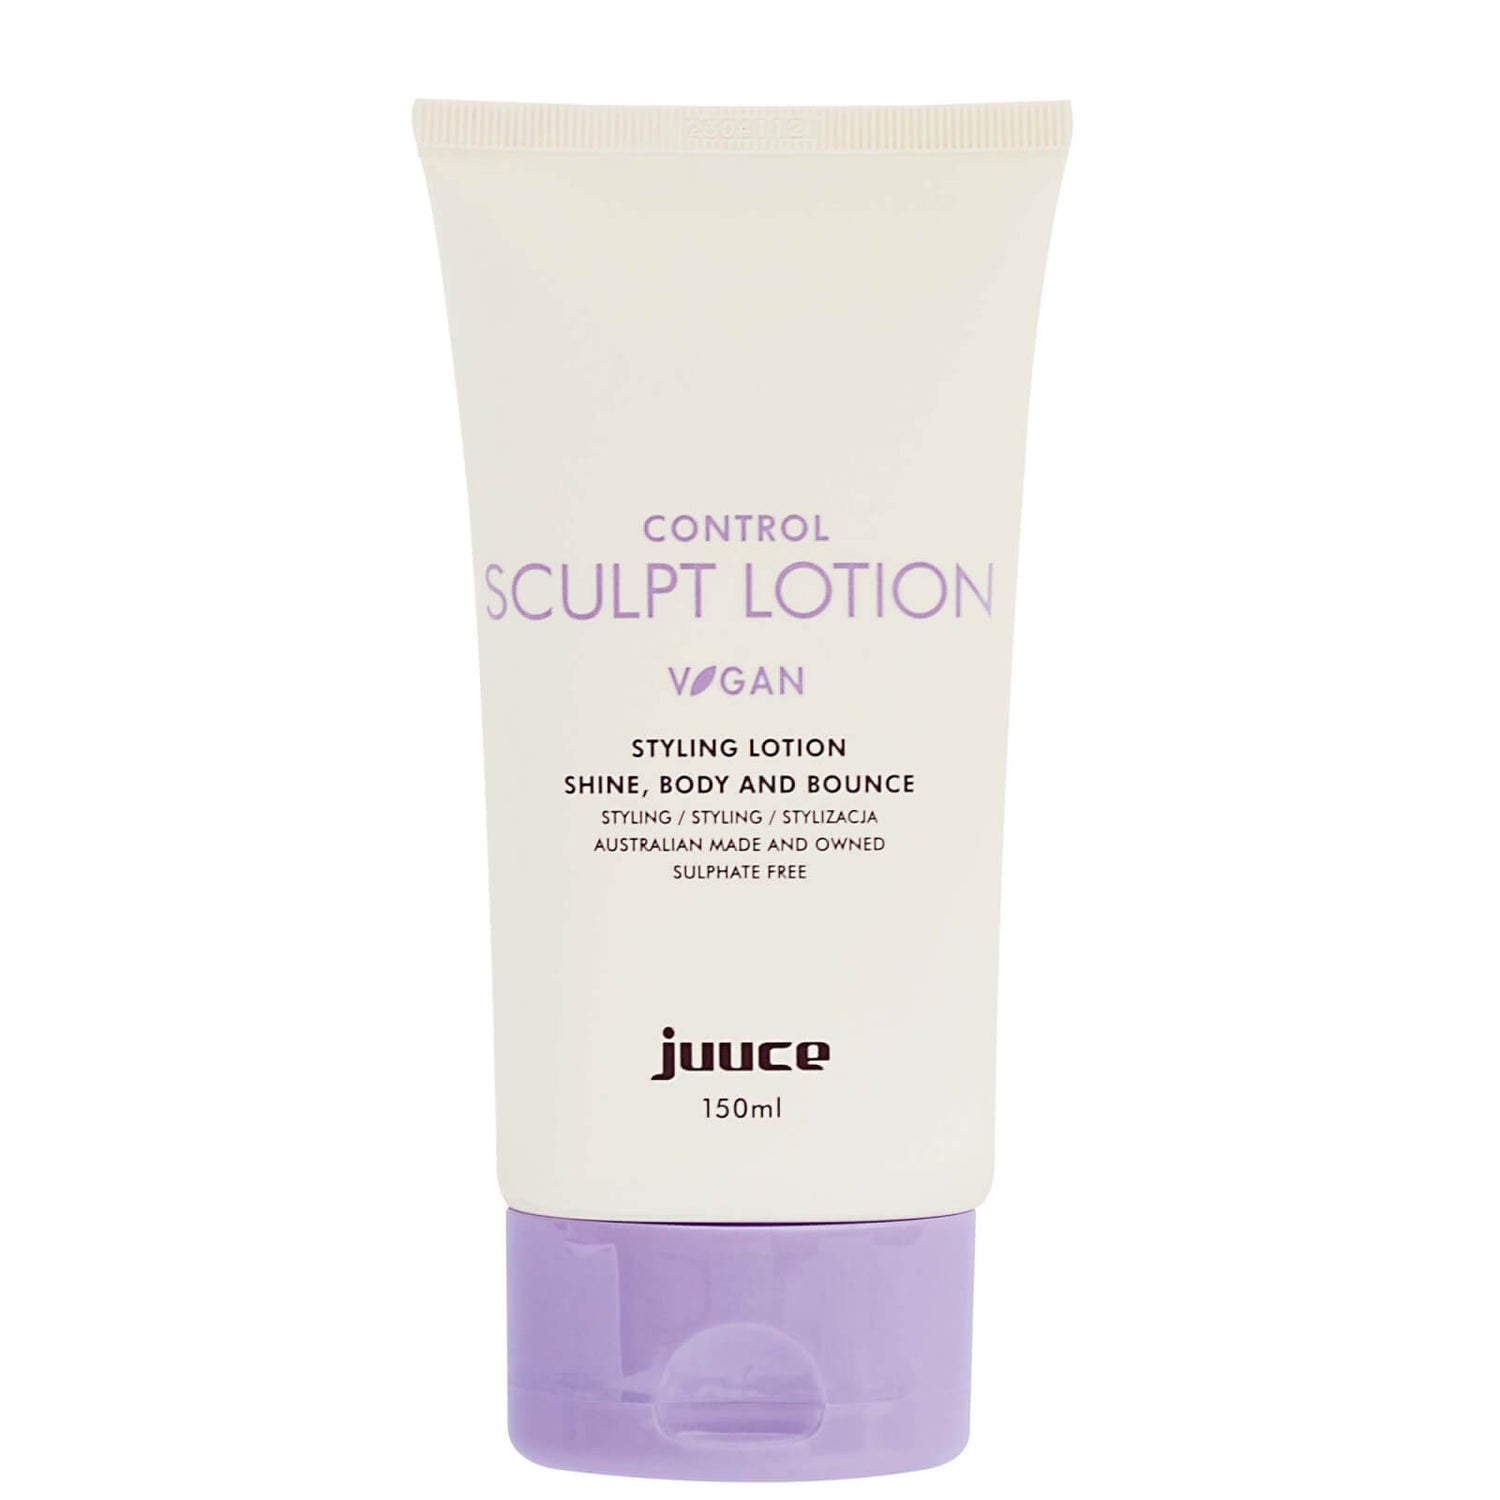 Juuce Sculpt Lotion Styling Lotion 150ml